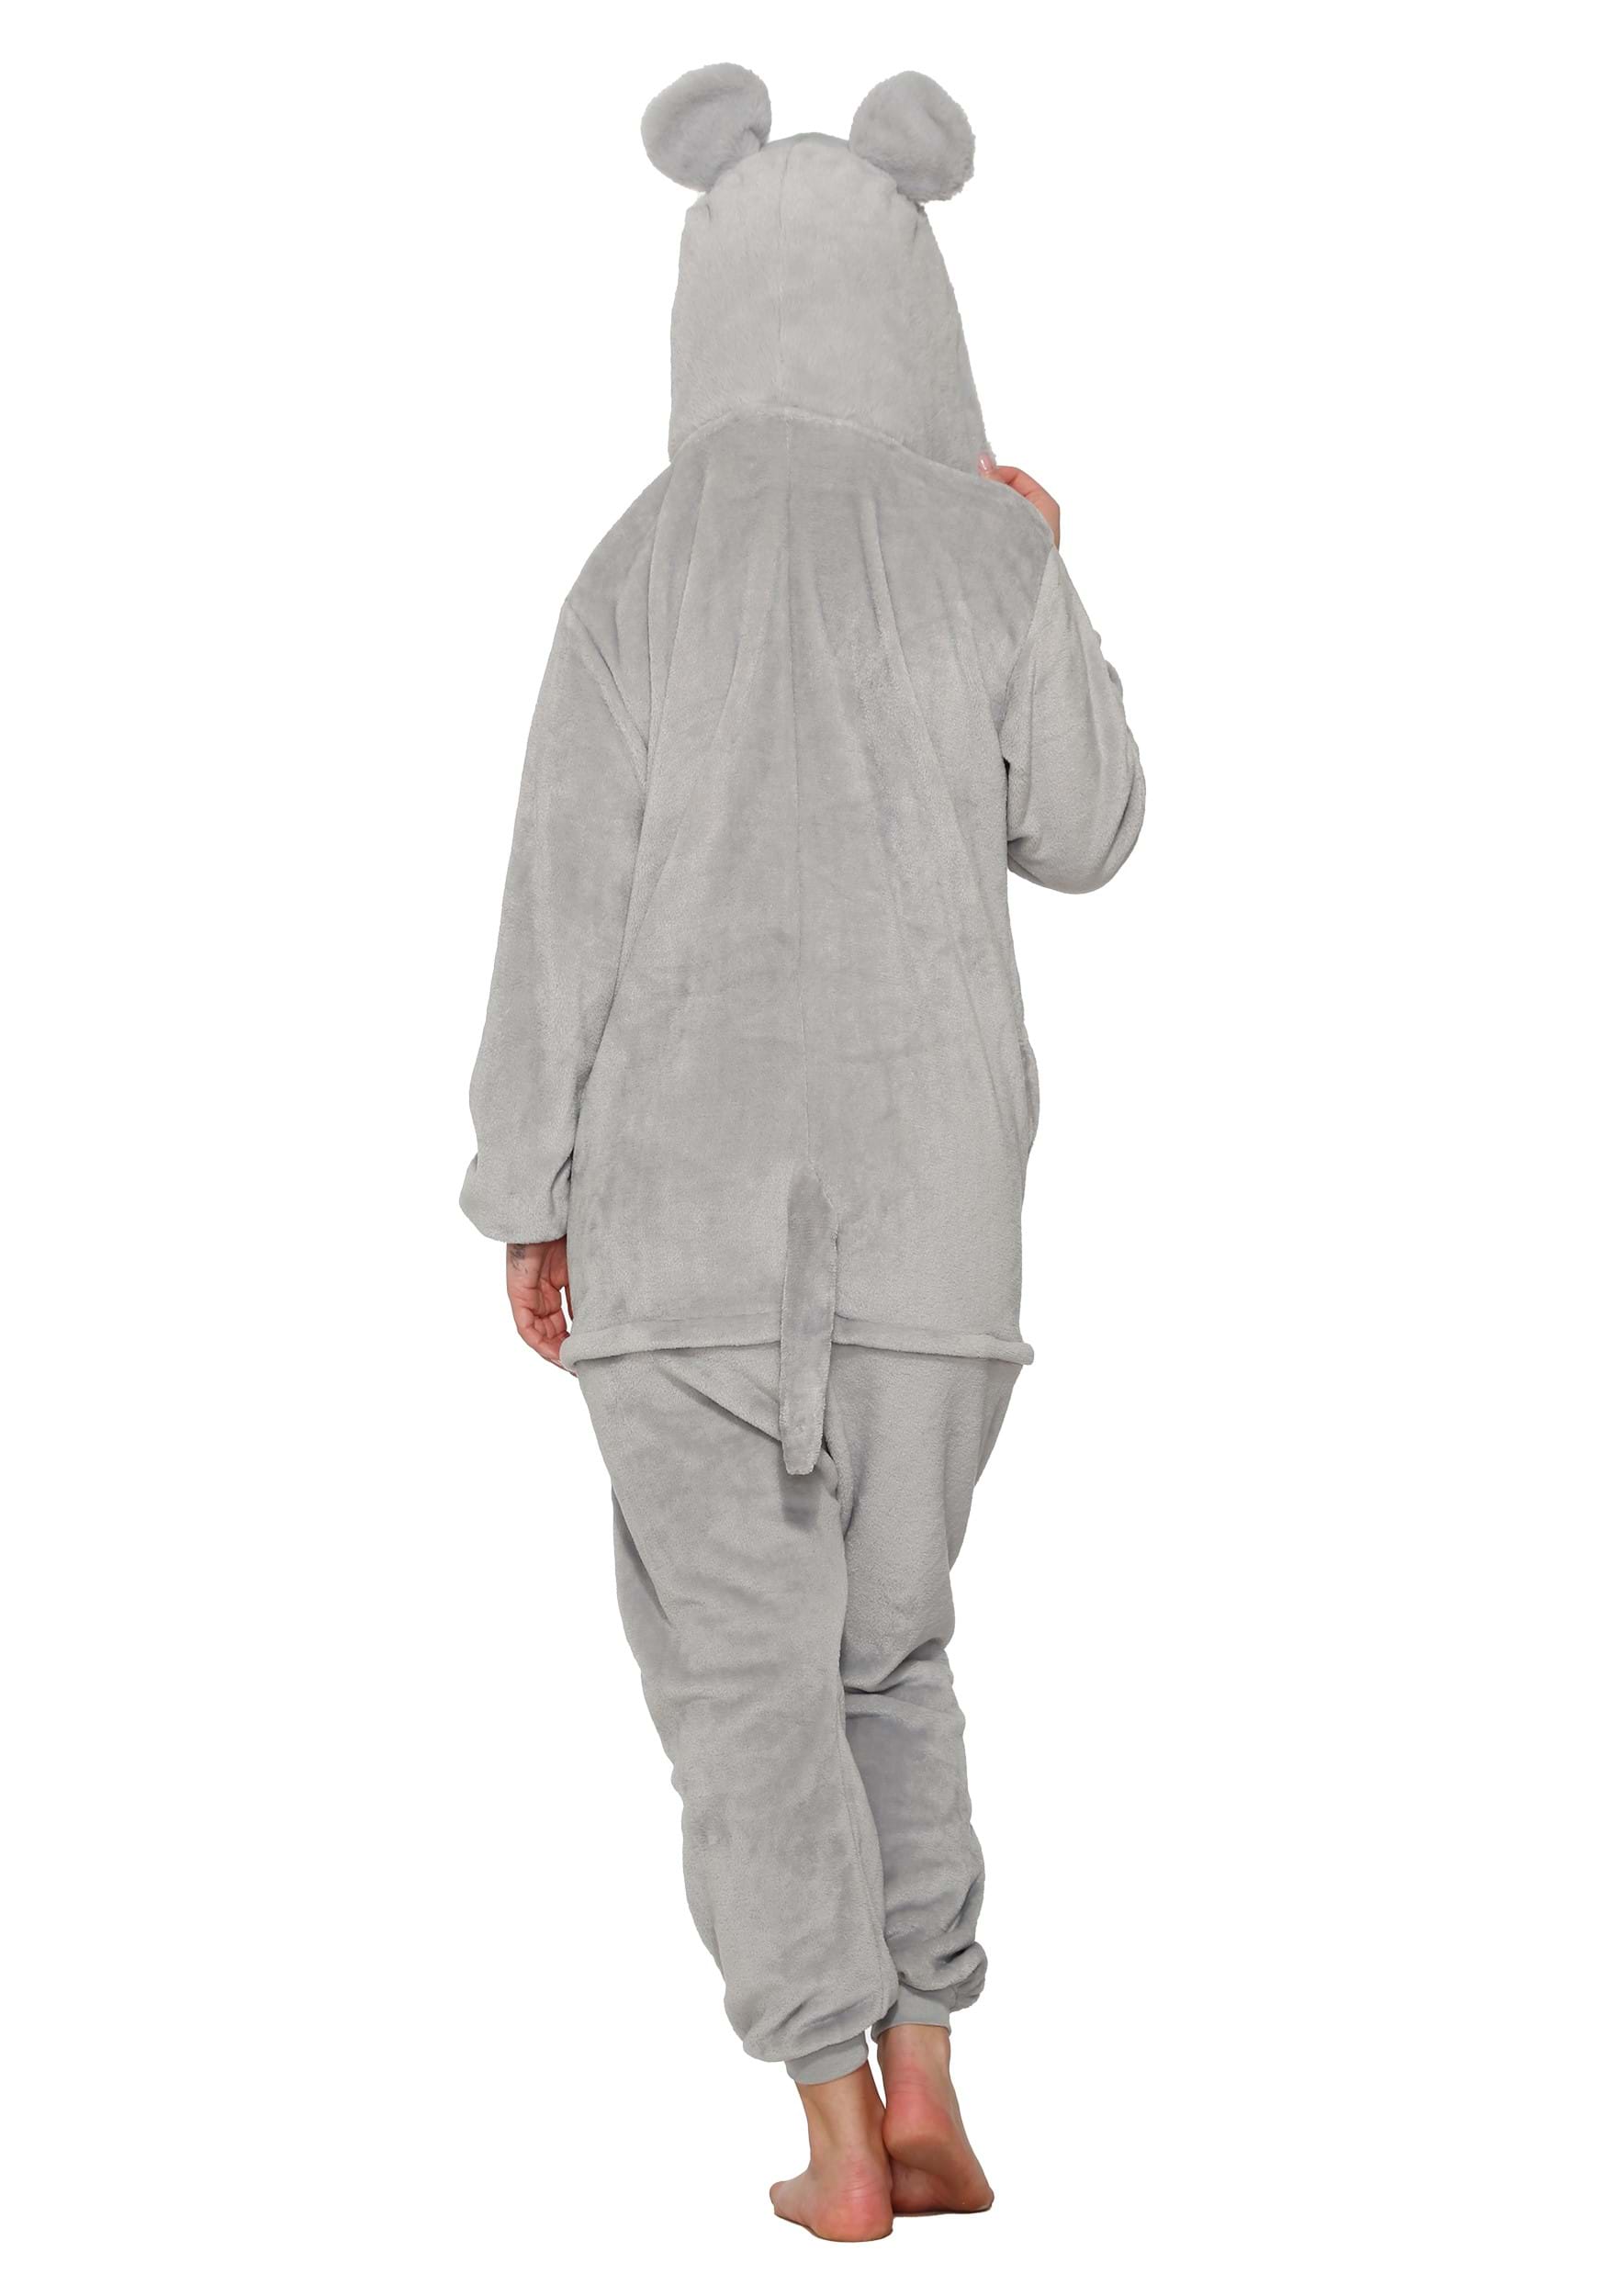 Adult Gray Mouse Onesie Costume